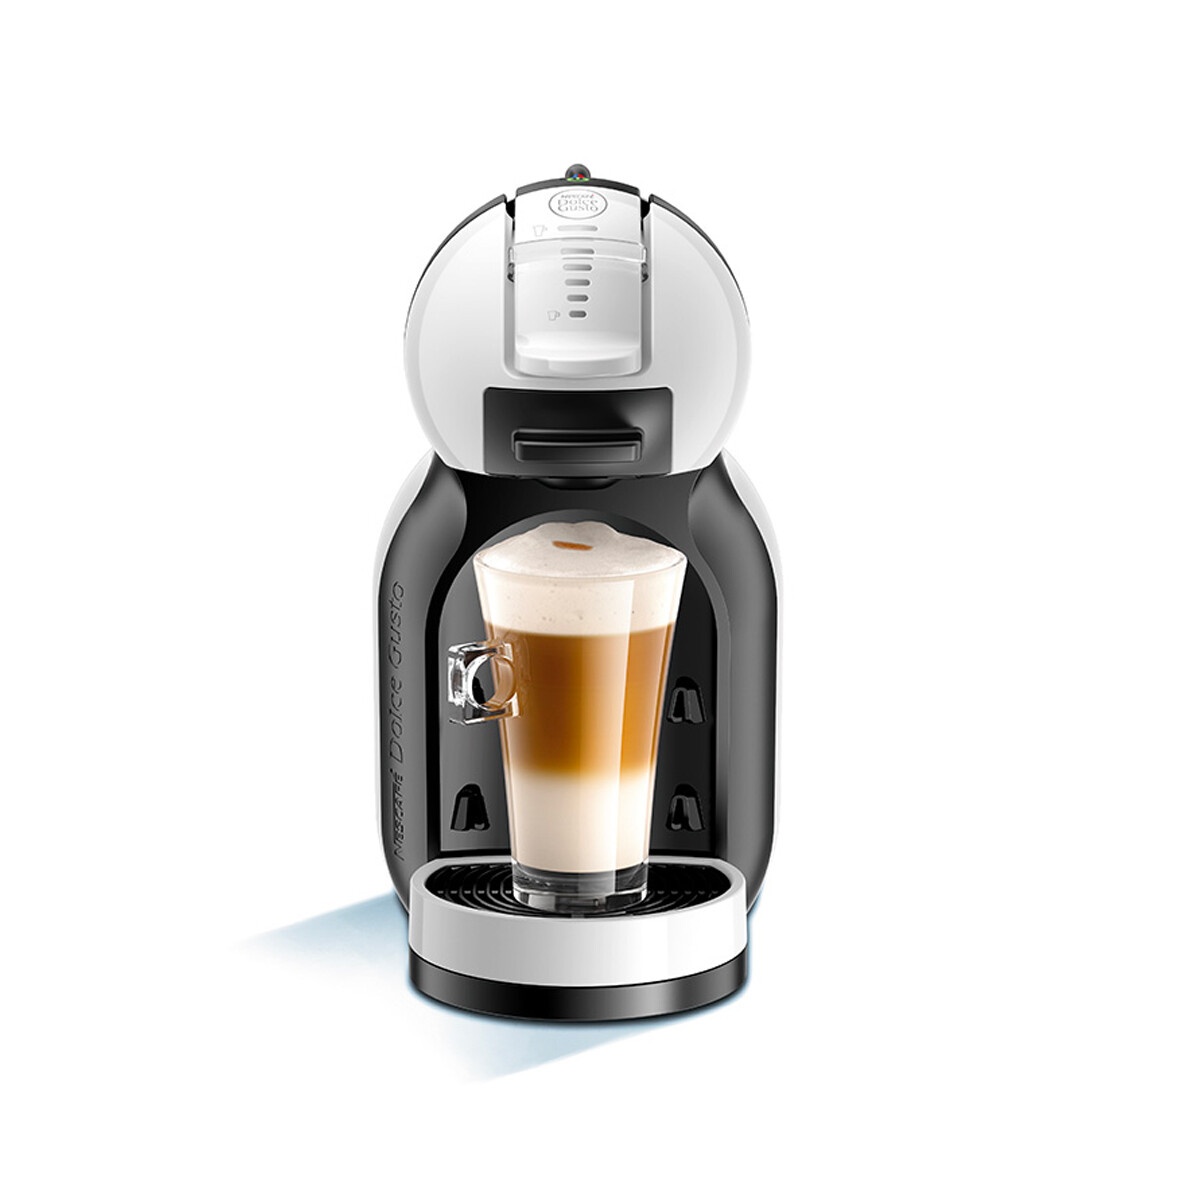 Cafetera Dolce Gusto Mini Me - Blanca 